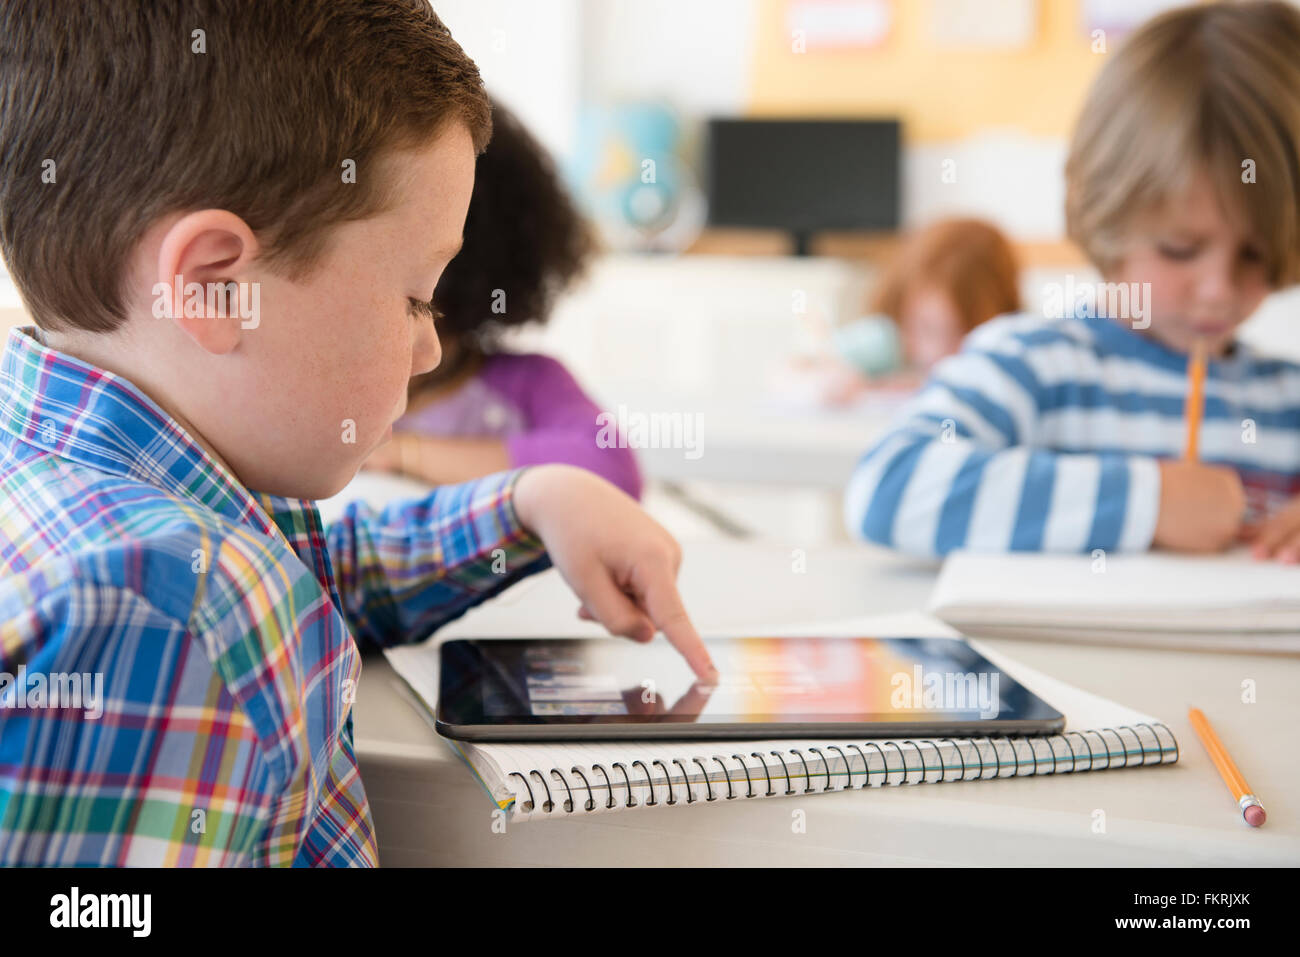 Student using digital tablet in classroom Stock Photo